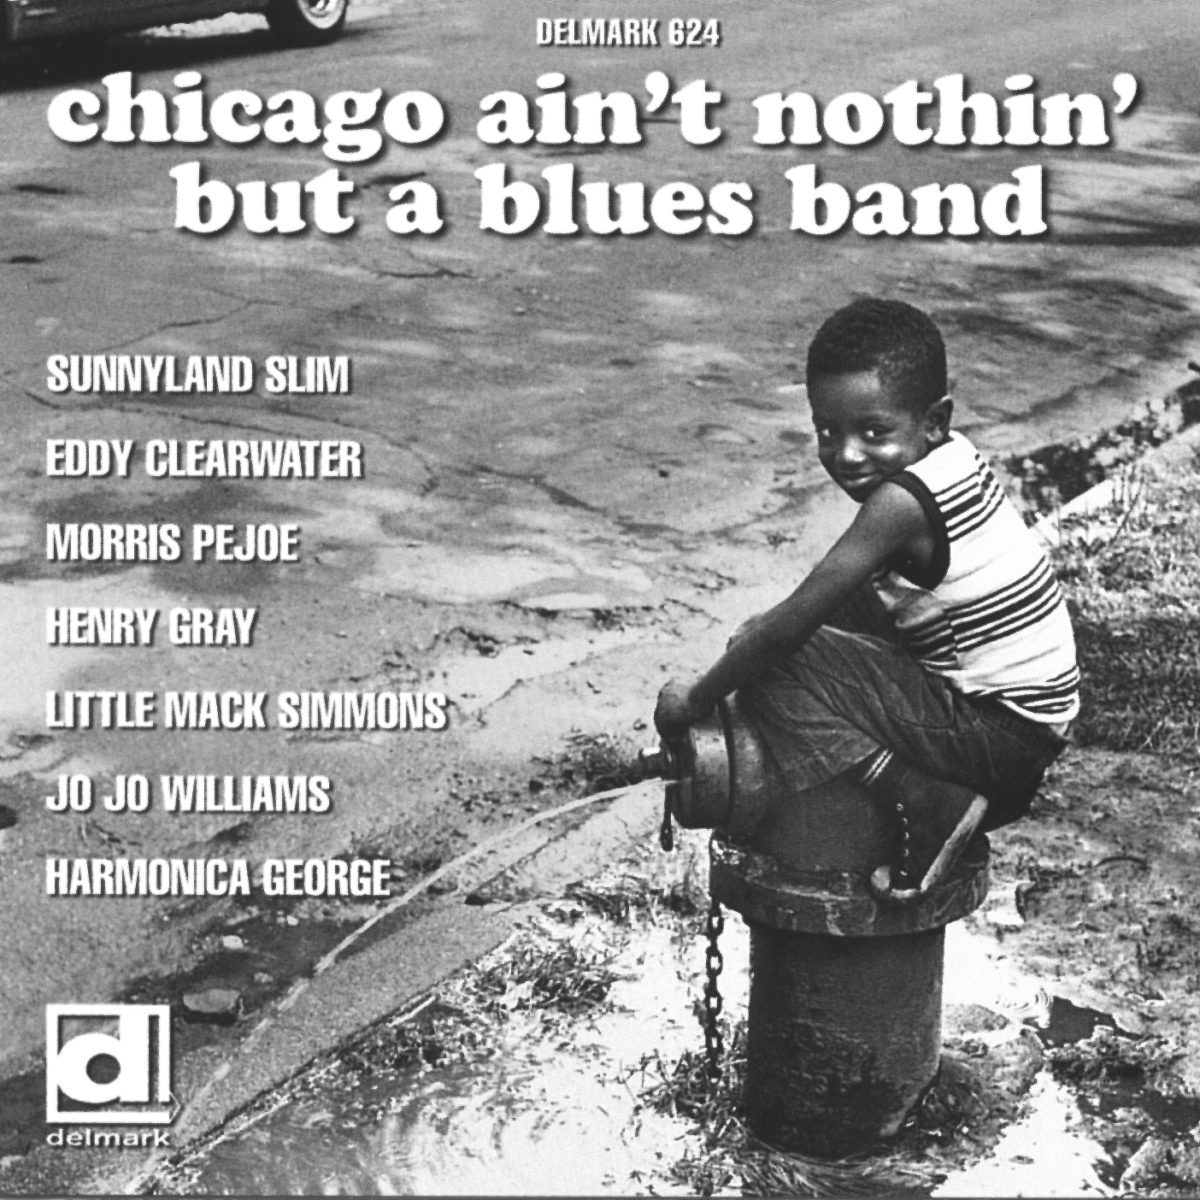 Nothin'　Chicago　Band　Ain't　But　–　A　Blues　DELMARK　RECORDS